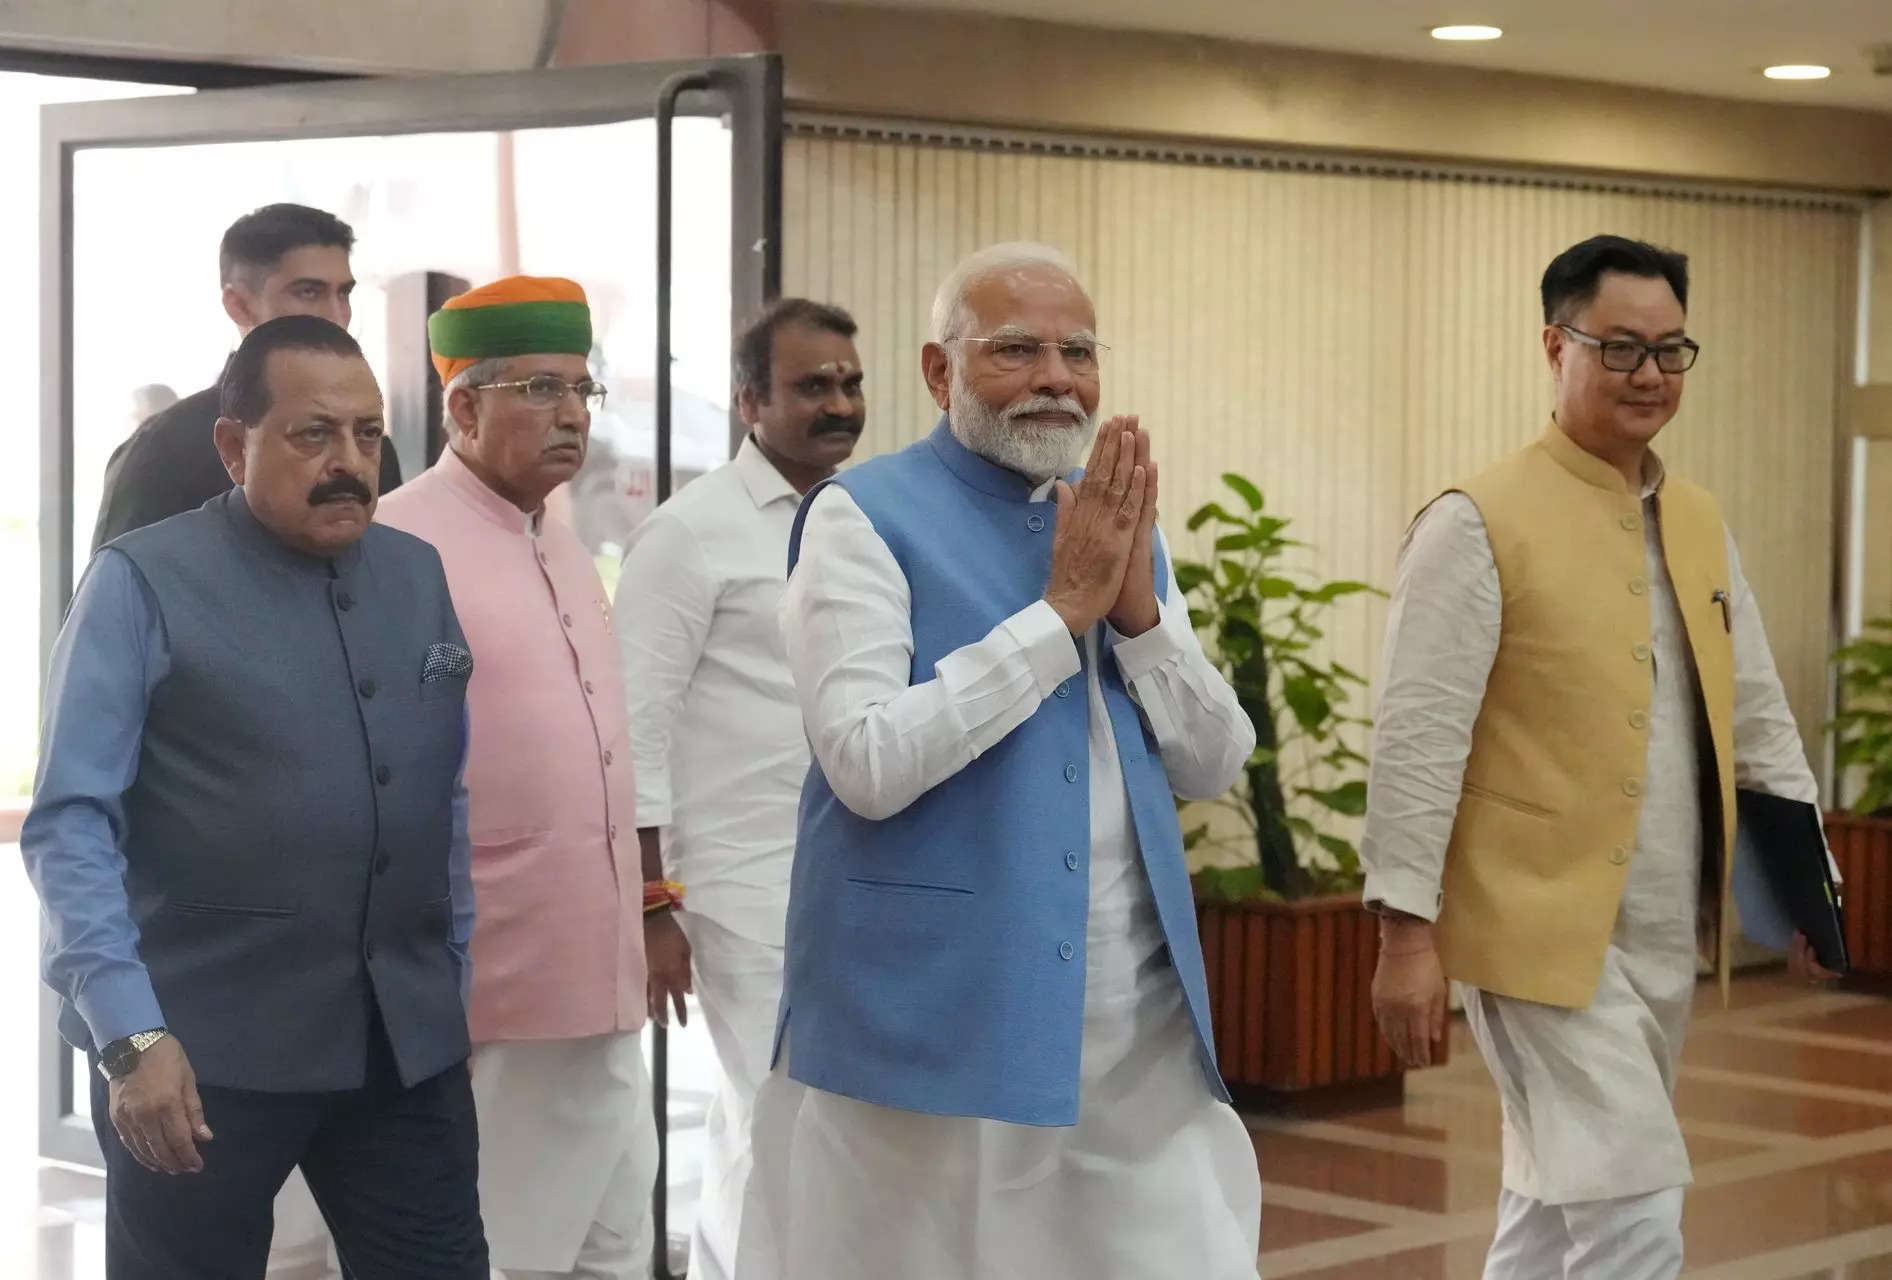 PM asked NDA MPs to follow parliamentary rules, says Union Minister Rijiju after meet 